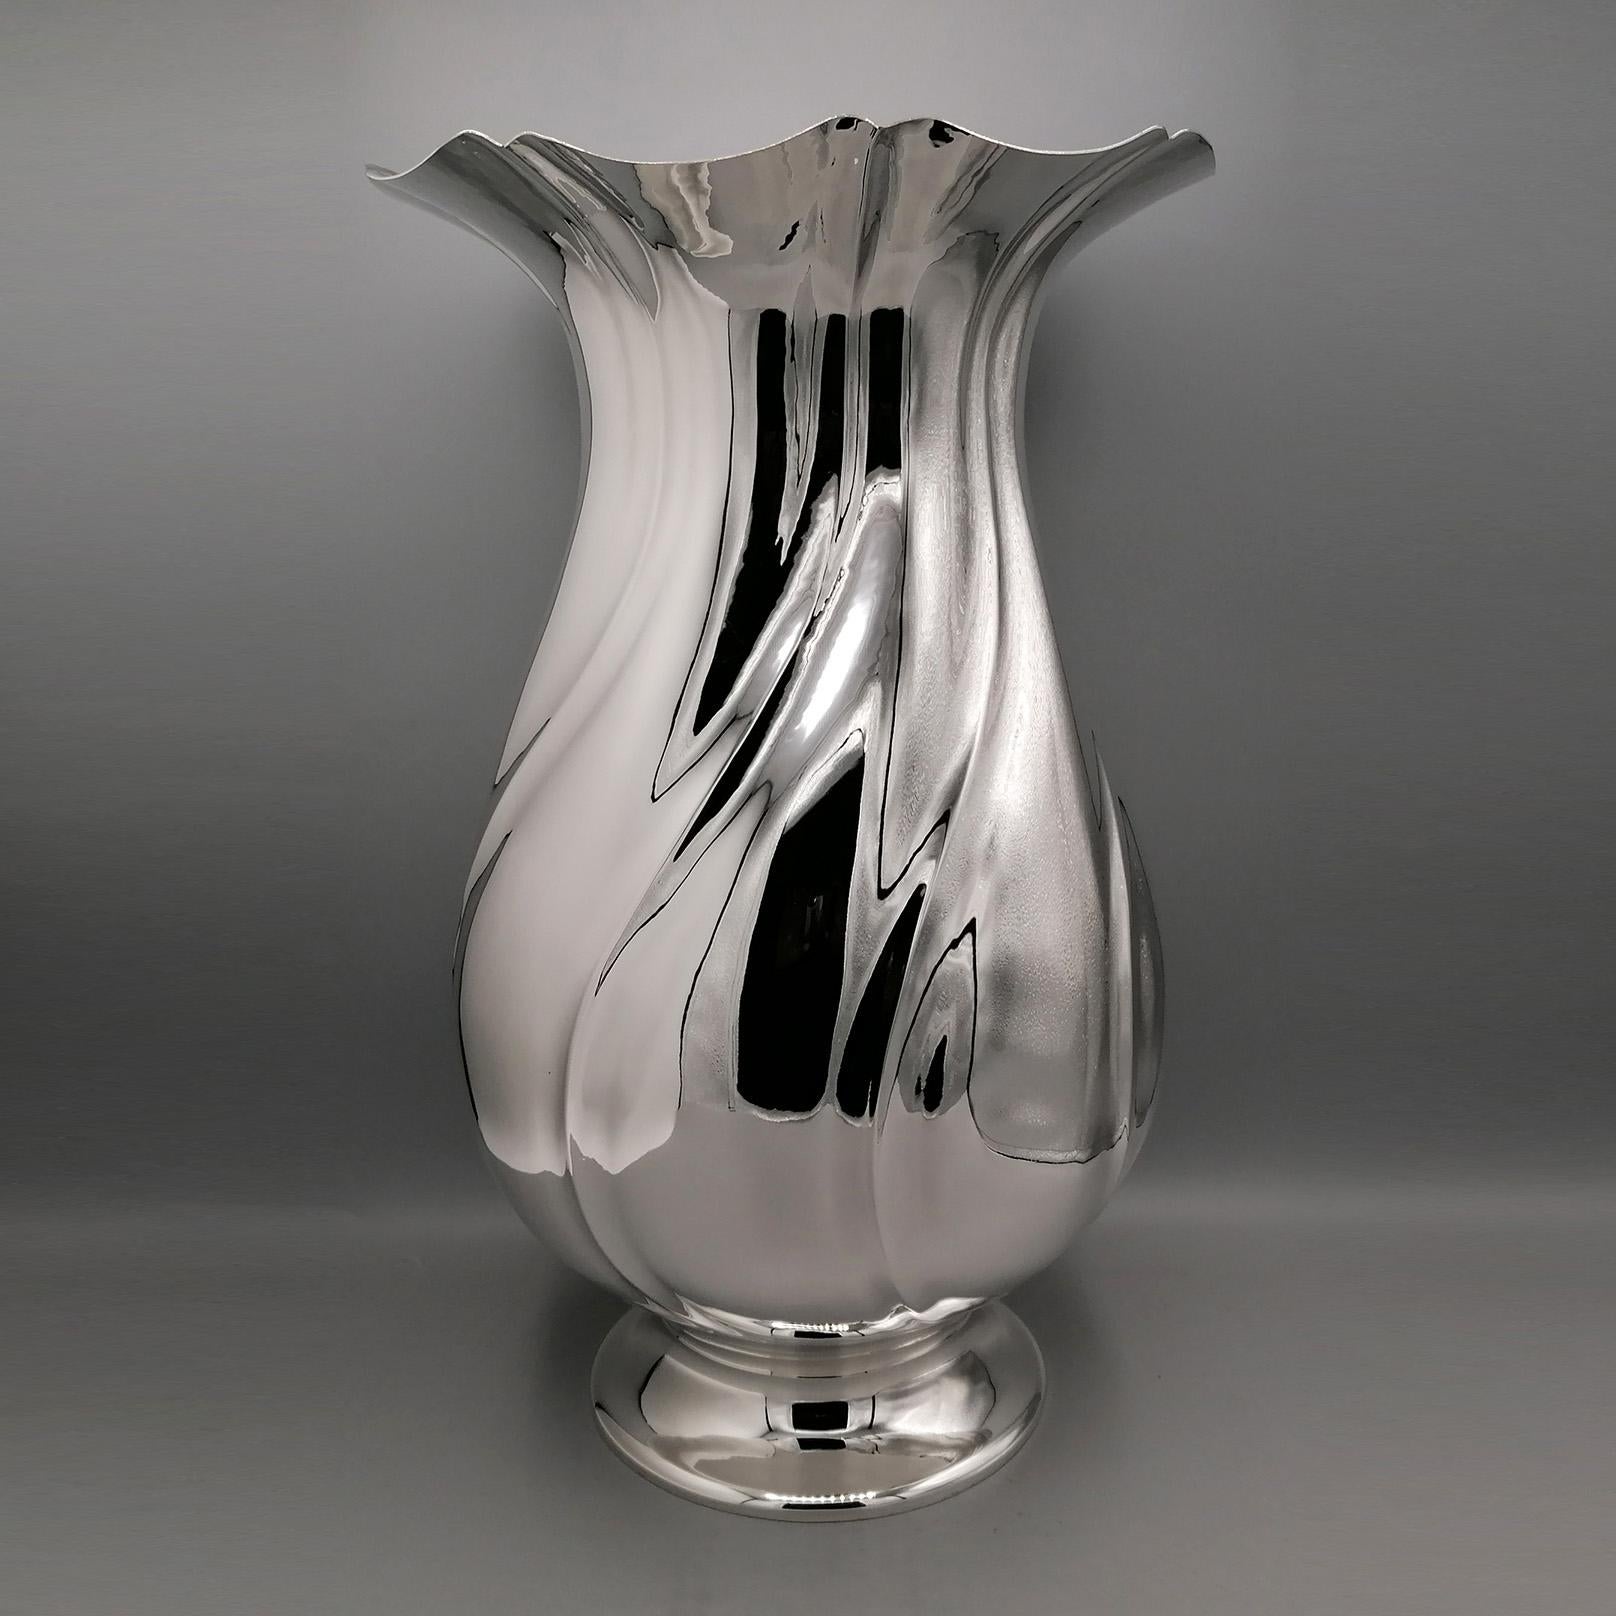 Impressive solid 800 silver vase.
The pot-bellied body was embossed and chiseled with a torchon motif, creating a notable brightness and brilliance to the vase.
The mouth of the vase is very wide, suitable for holding long-stemmed flowers.
The base,